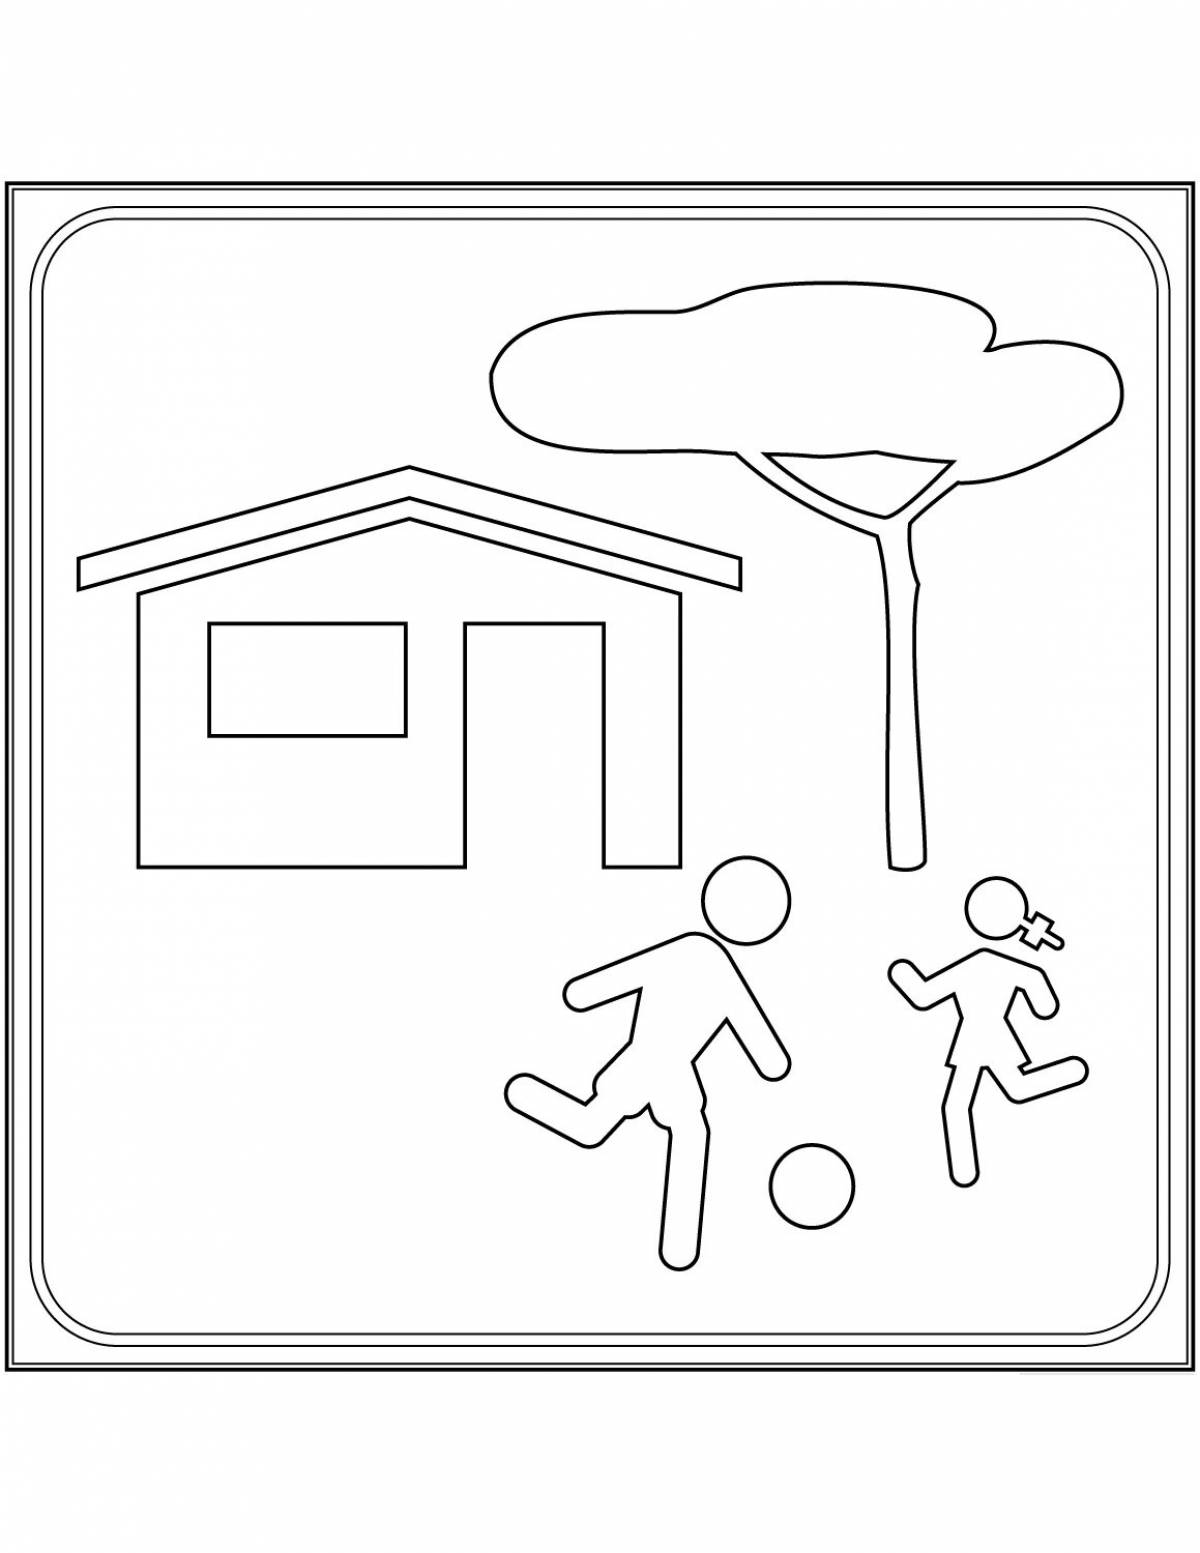 Coloring page invitation sign for a residential area